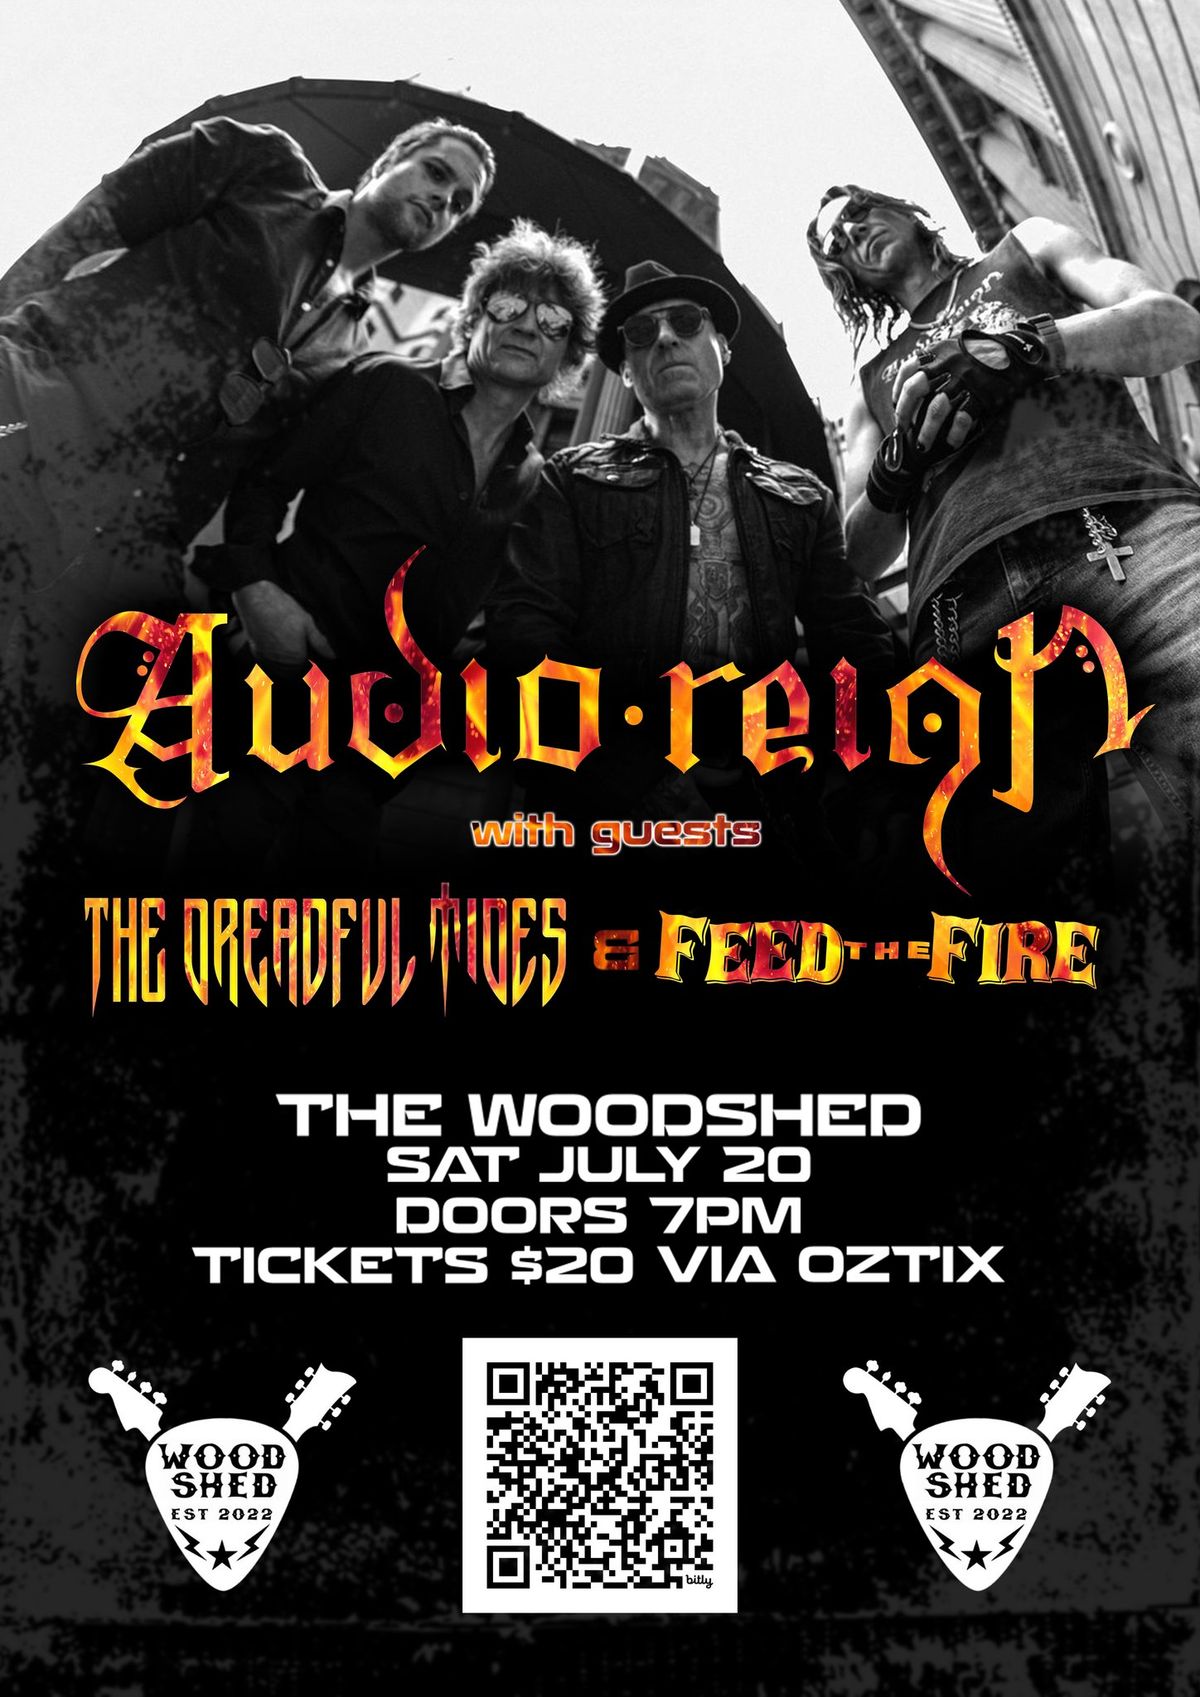 AUDIO REIGN 'The Perfect Sea' Album Tour w\/ The Dreadful Tides (VIC) & Feed The Fire